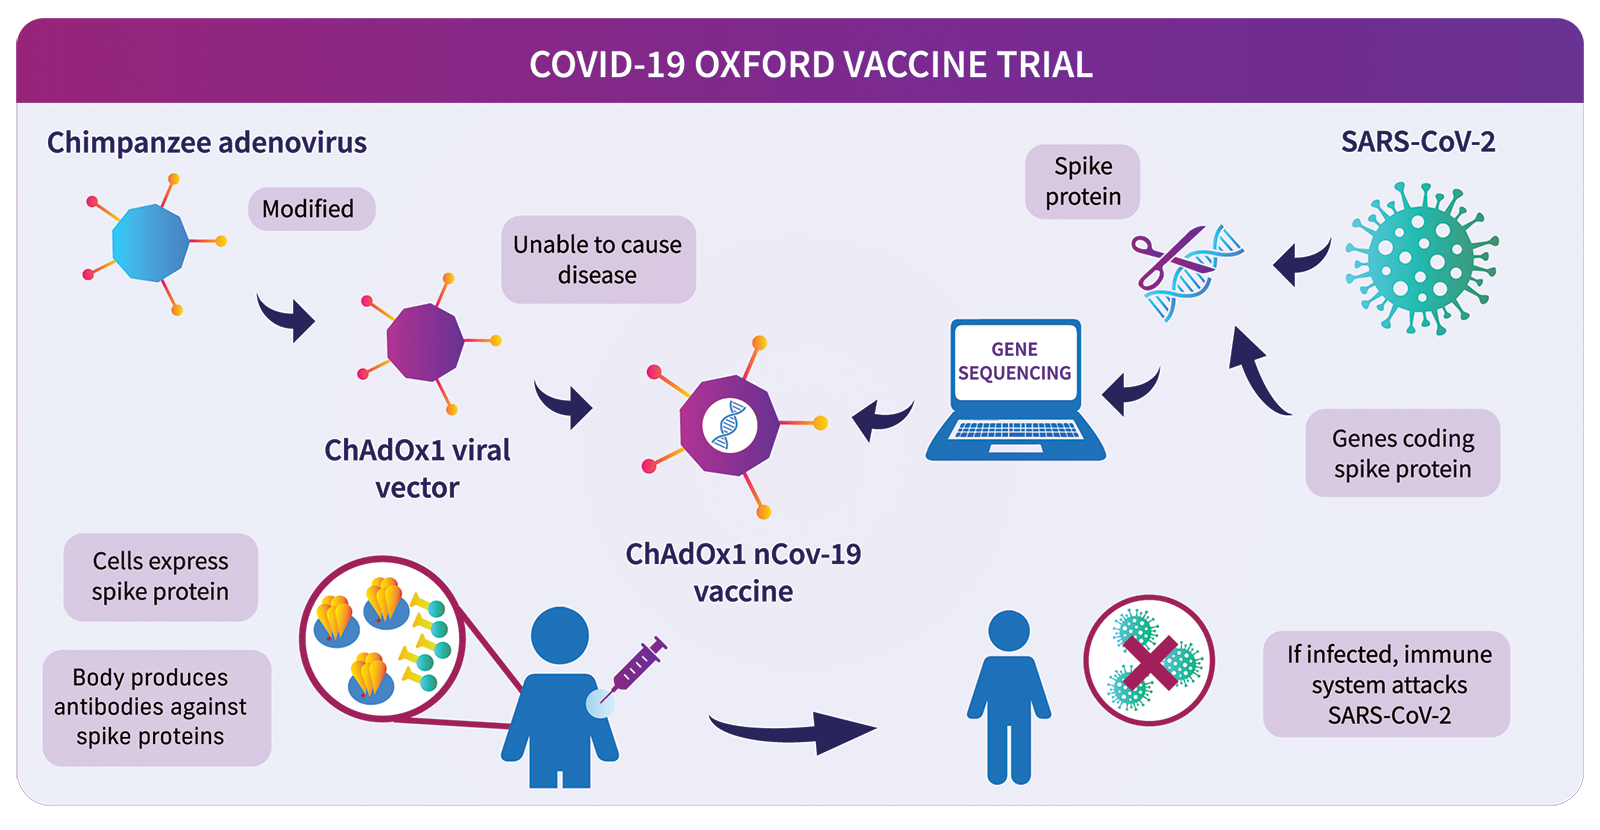 About the Oxford COVID-19 vaccine | Research | University of Oxford